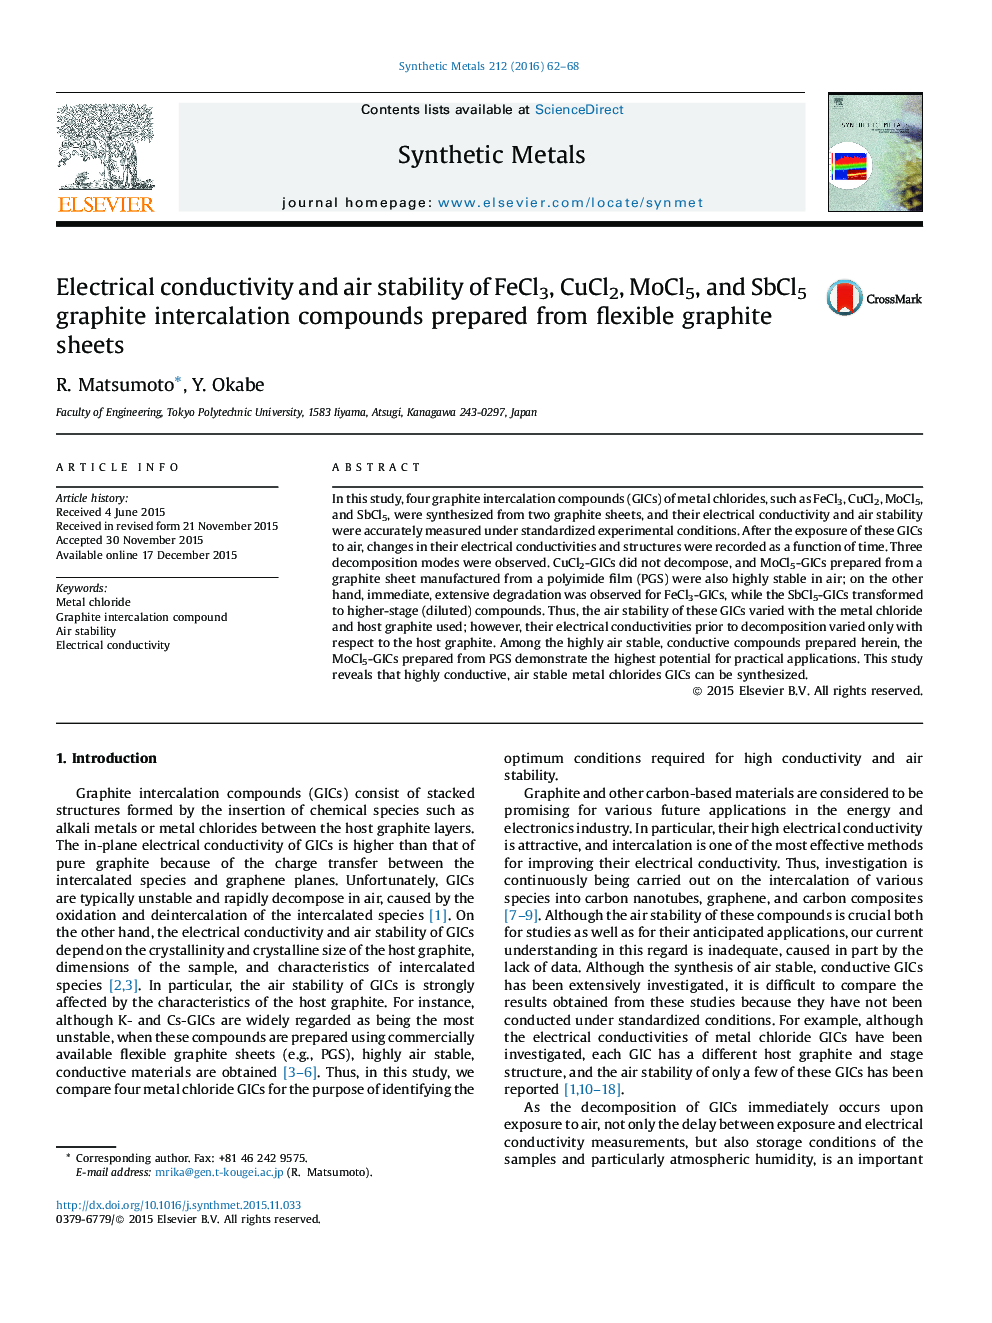 Electrical conductivity and air stability of FeCl3, CuCl2, MoCl5, and SbCl5 graphite intercalation compounds prepared from flexible graphite sheets